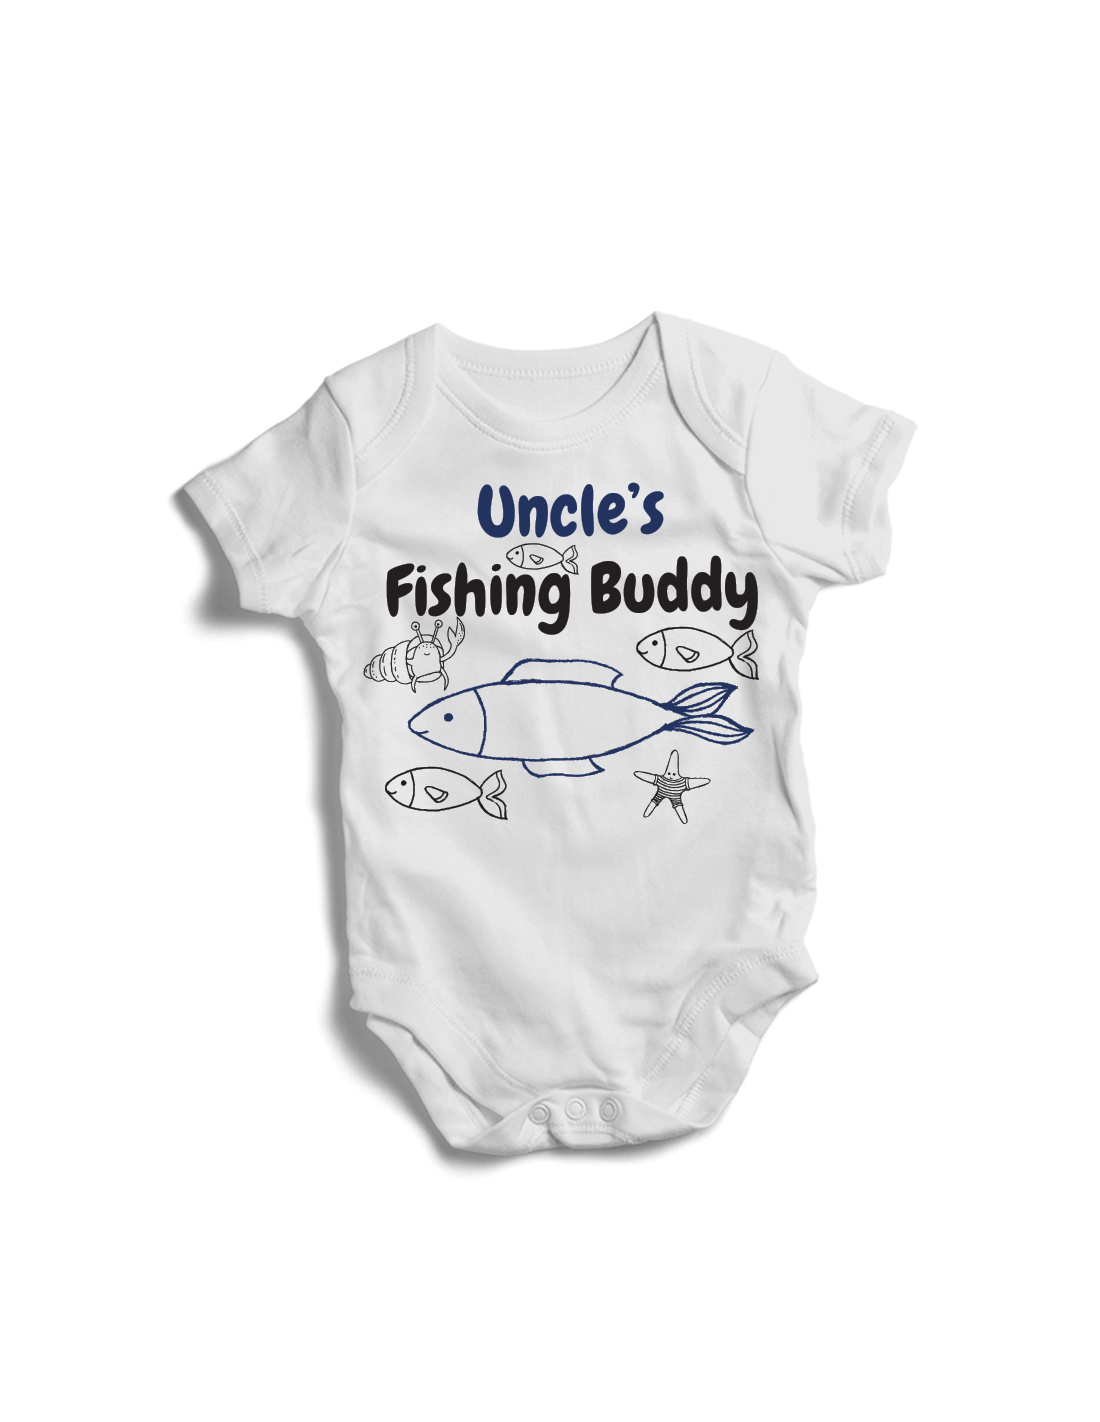 https://baby-suits.com/993-thickbox_default/uncle-s-fishing-buddy-little-fisher-baby-bodysuit.jpg